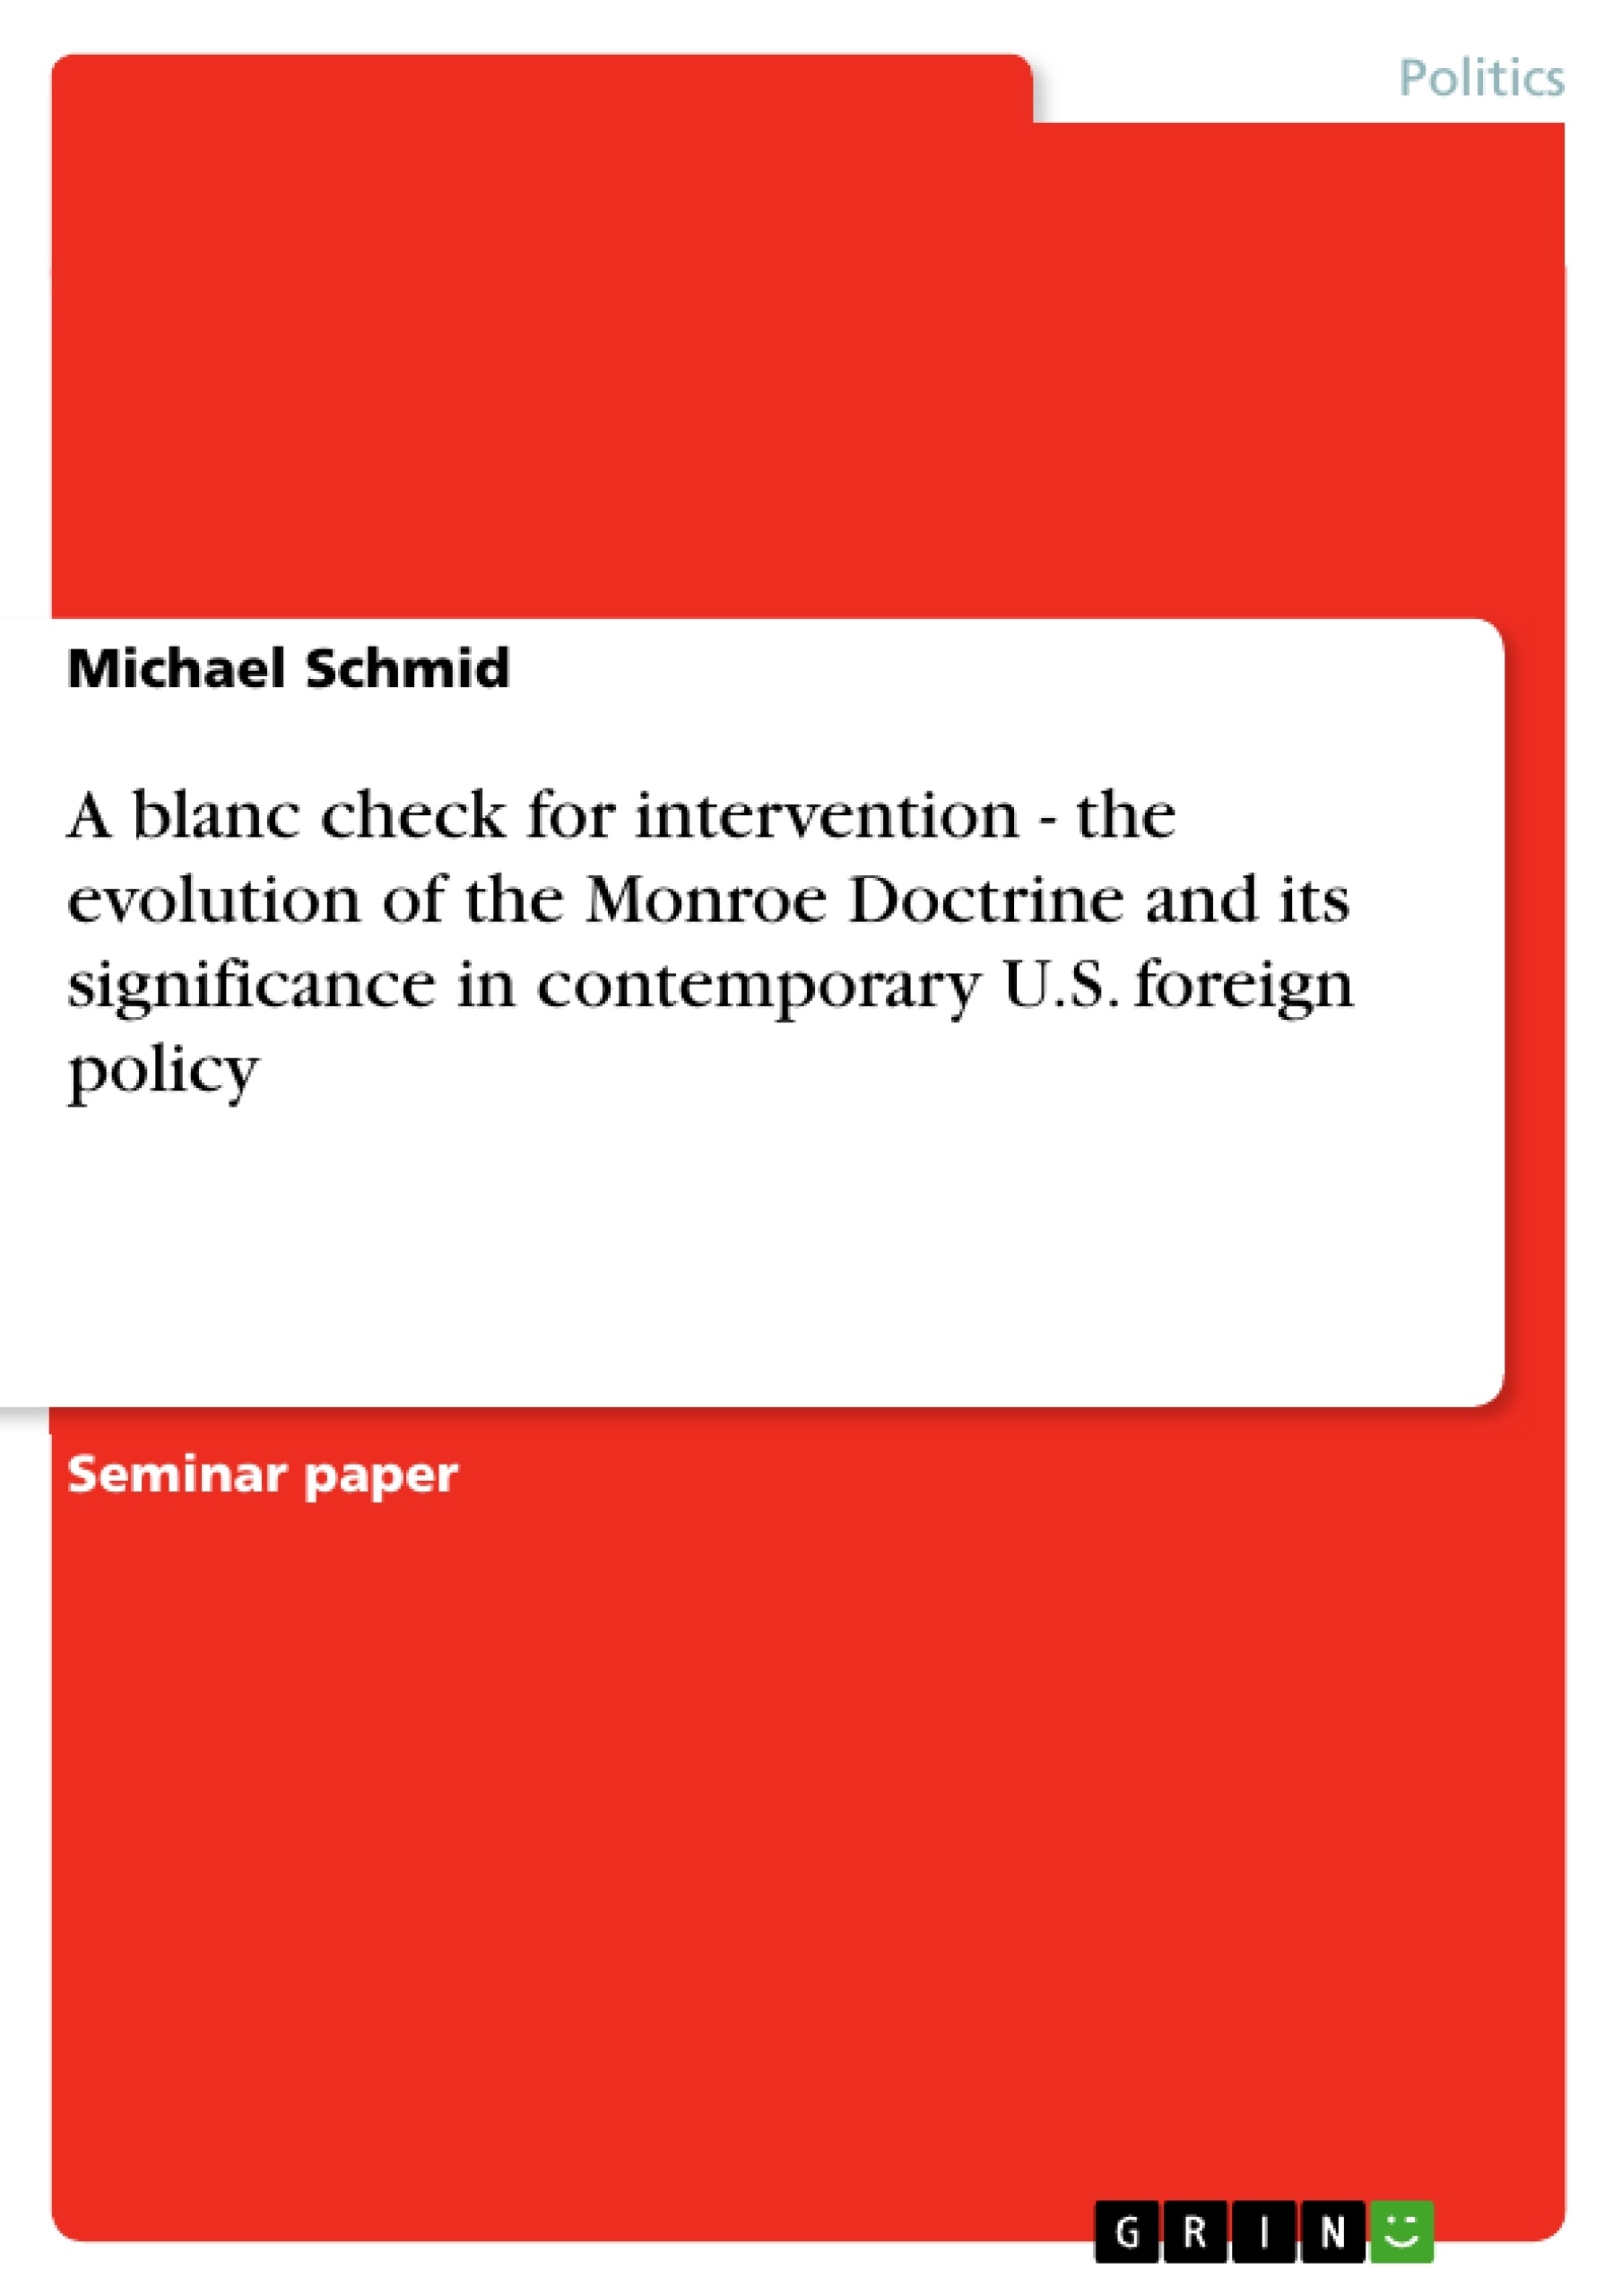 Title: A blanc check for intervention - the evolution of the Monroe Doctrine and its significance in contemporary U.S. foreign policy